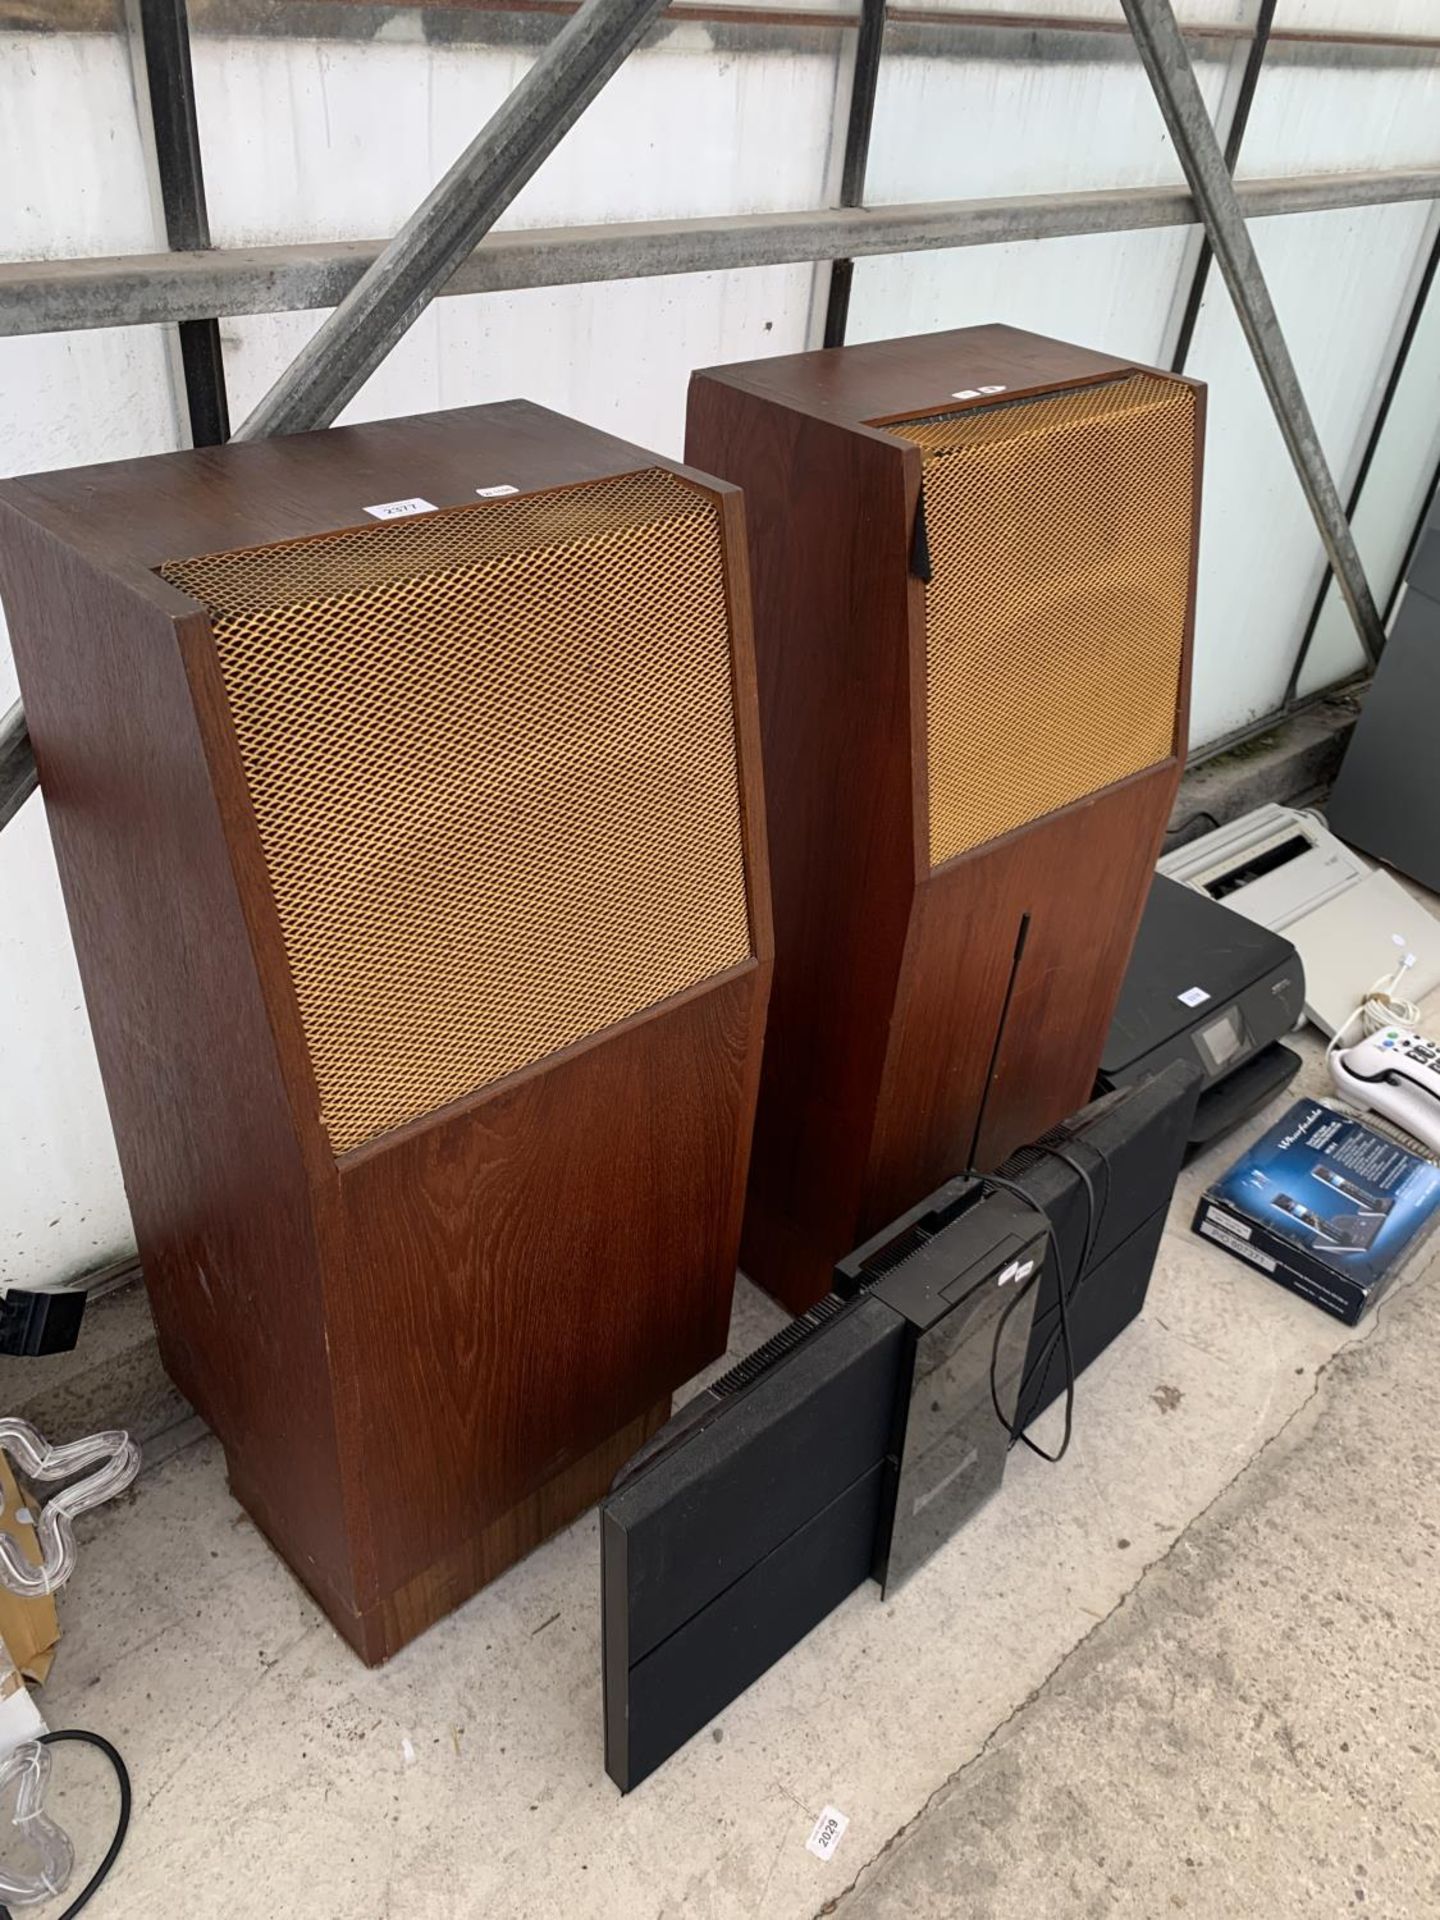 A BANG AND OULFSEN BEOSOUND CENTURY CD PLAYER AND A PAIR OF WOODEN CASED TOWER SPEAKERS - Image 2 of 3